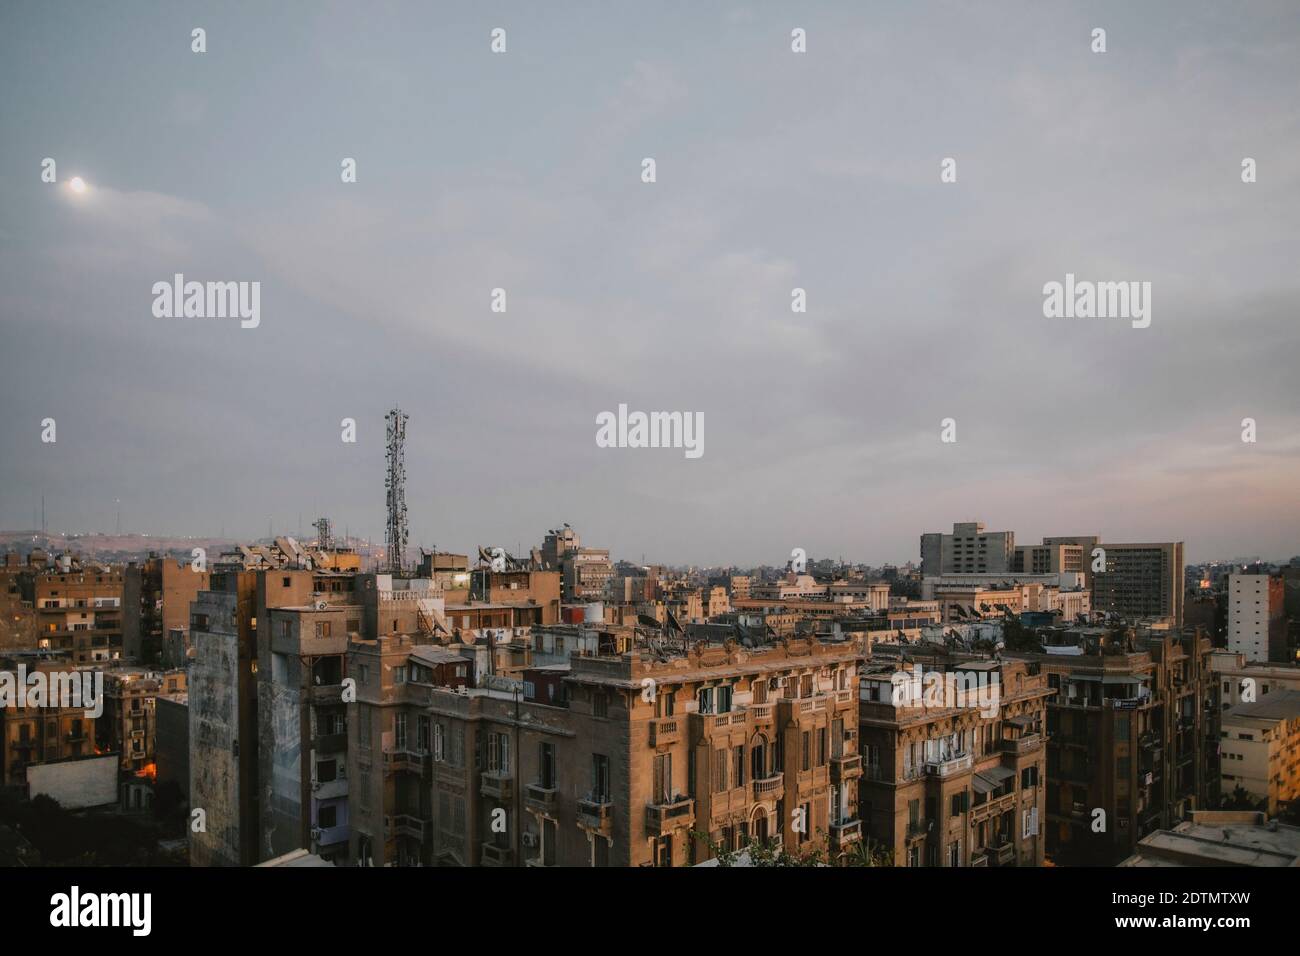 Buildings in Cairo, old town Stock Photo